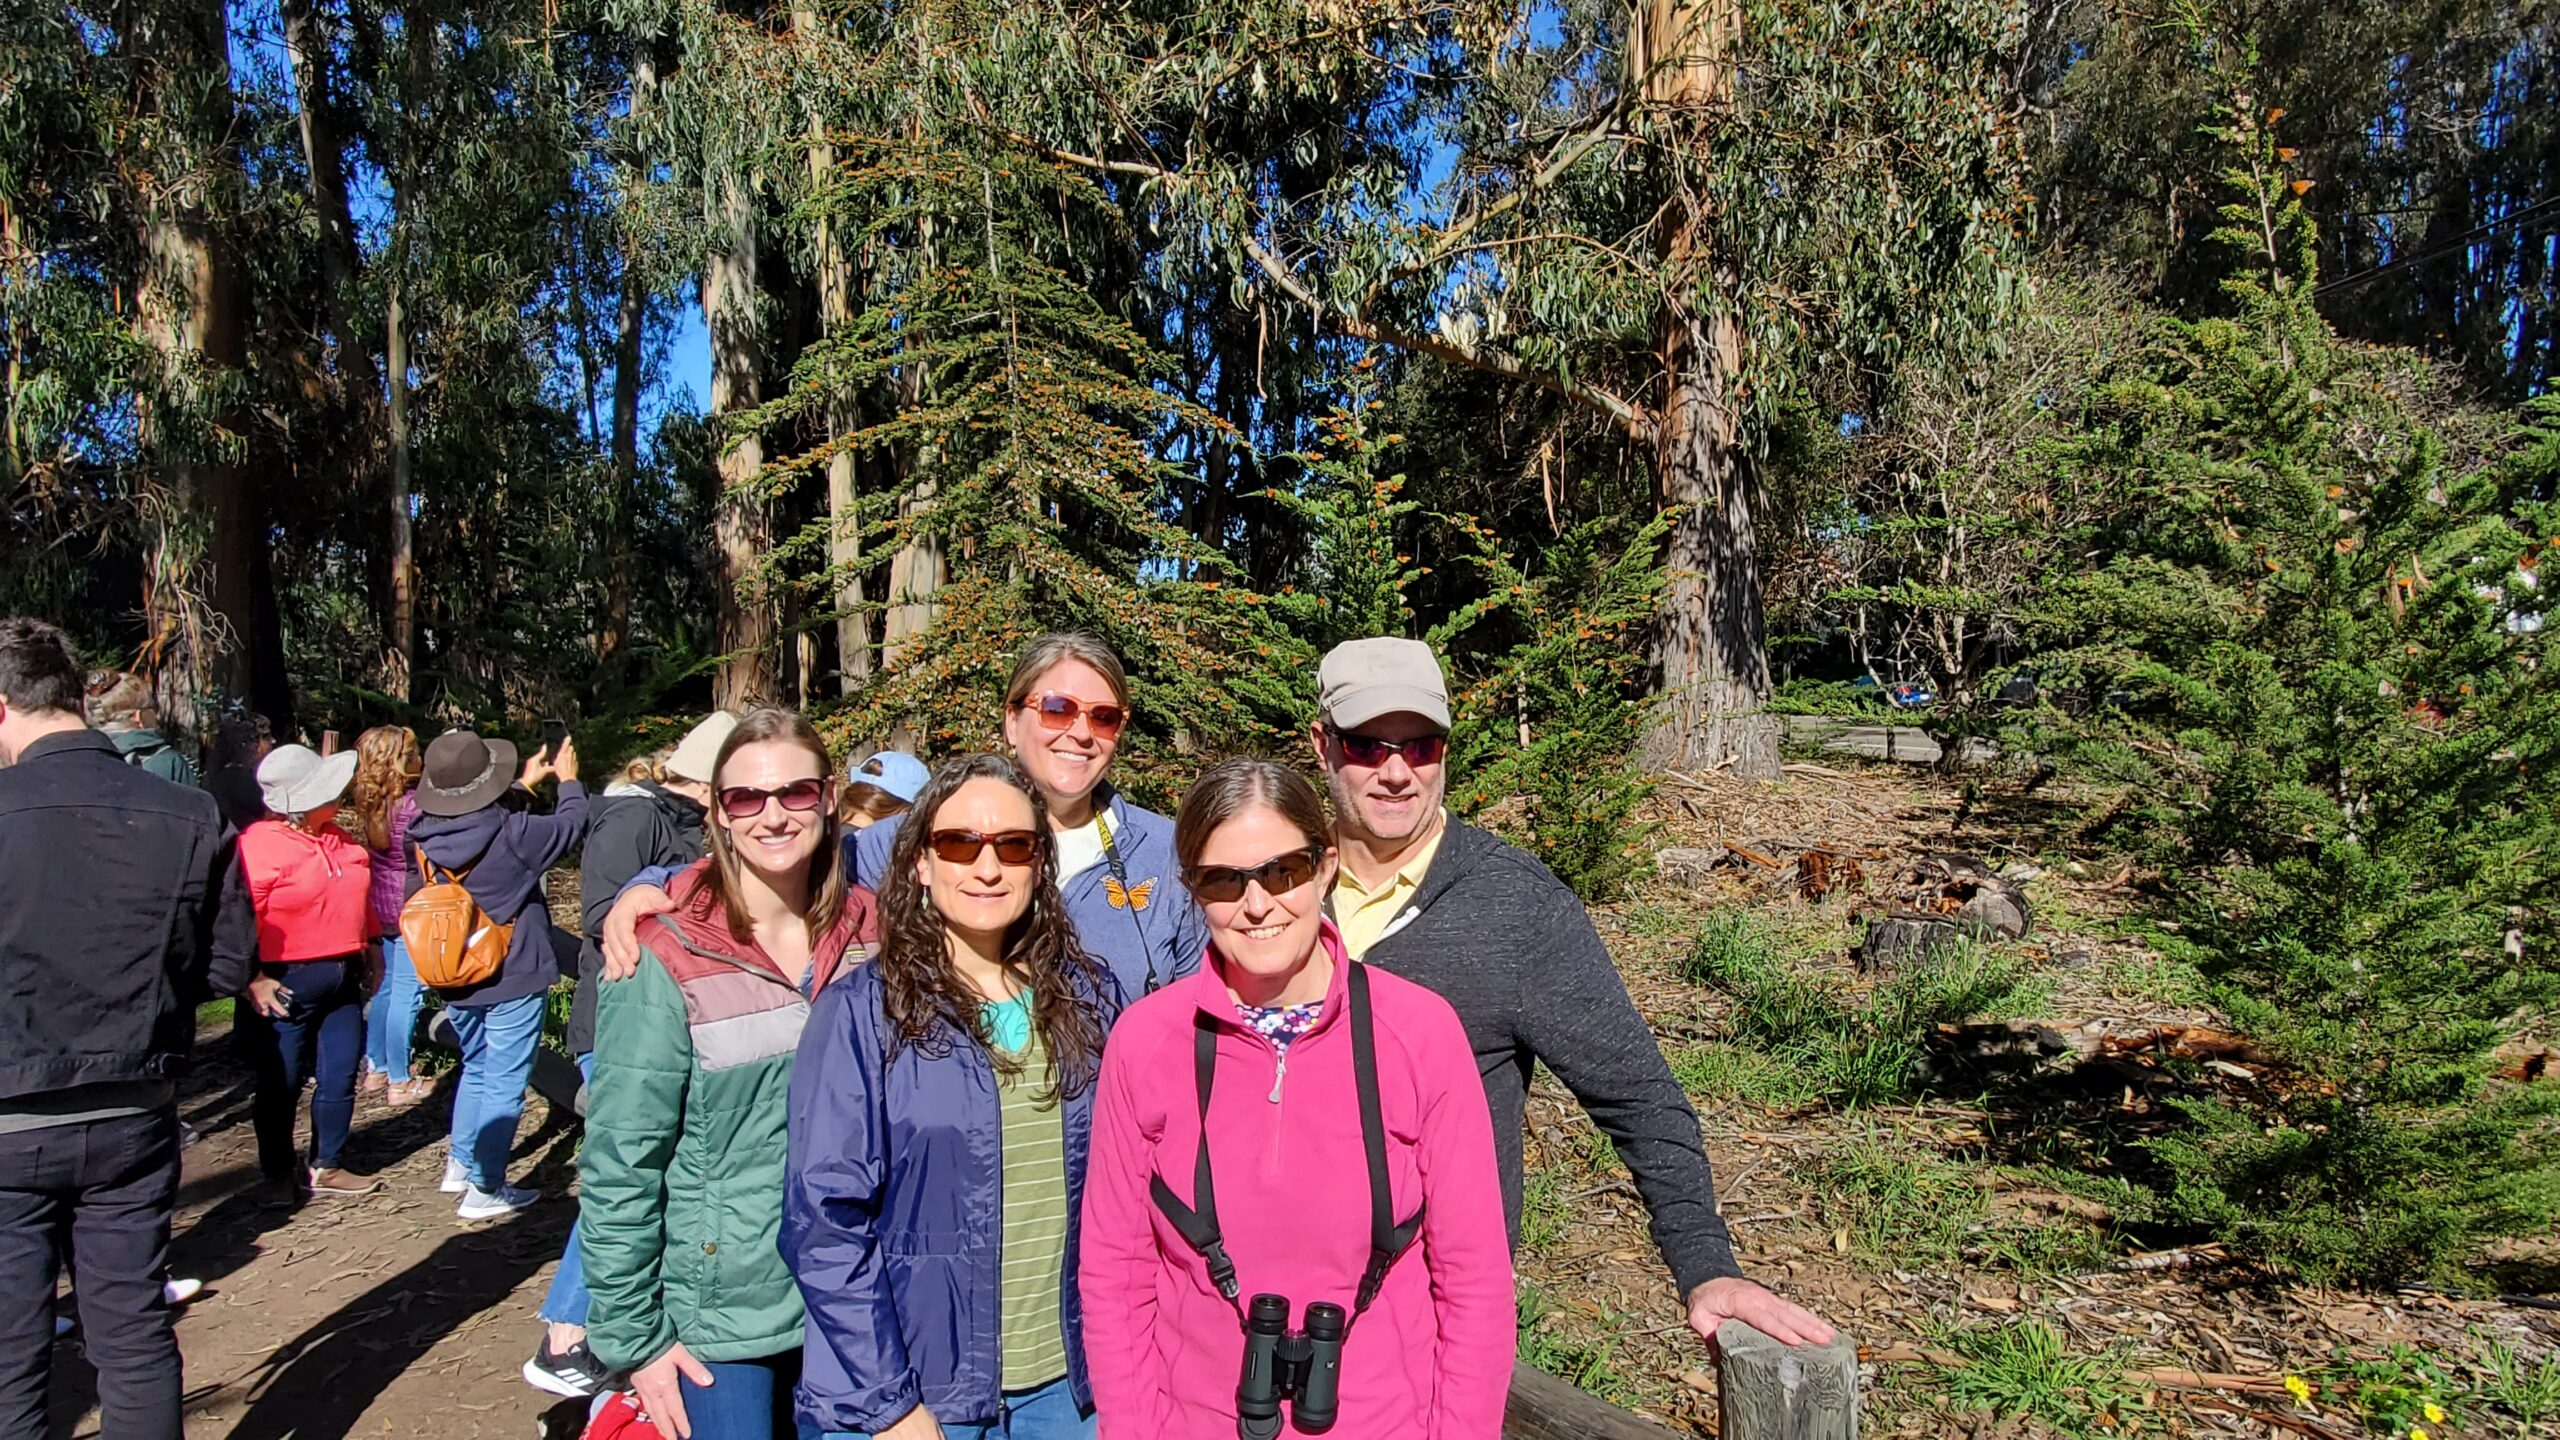 A group of people stand together for a photo in a forested area.